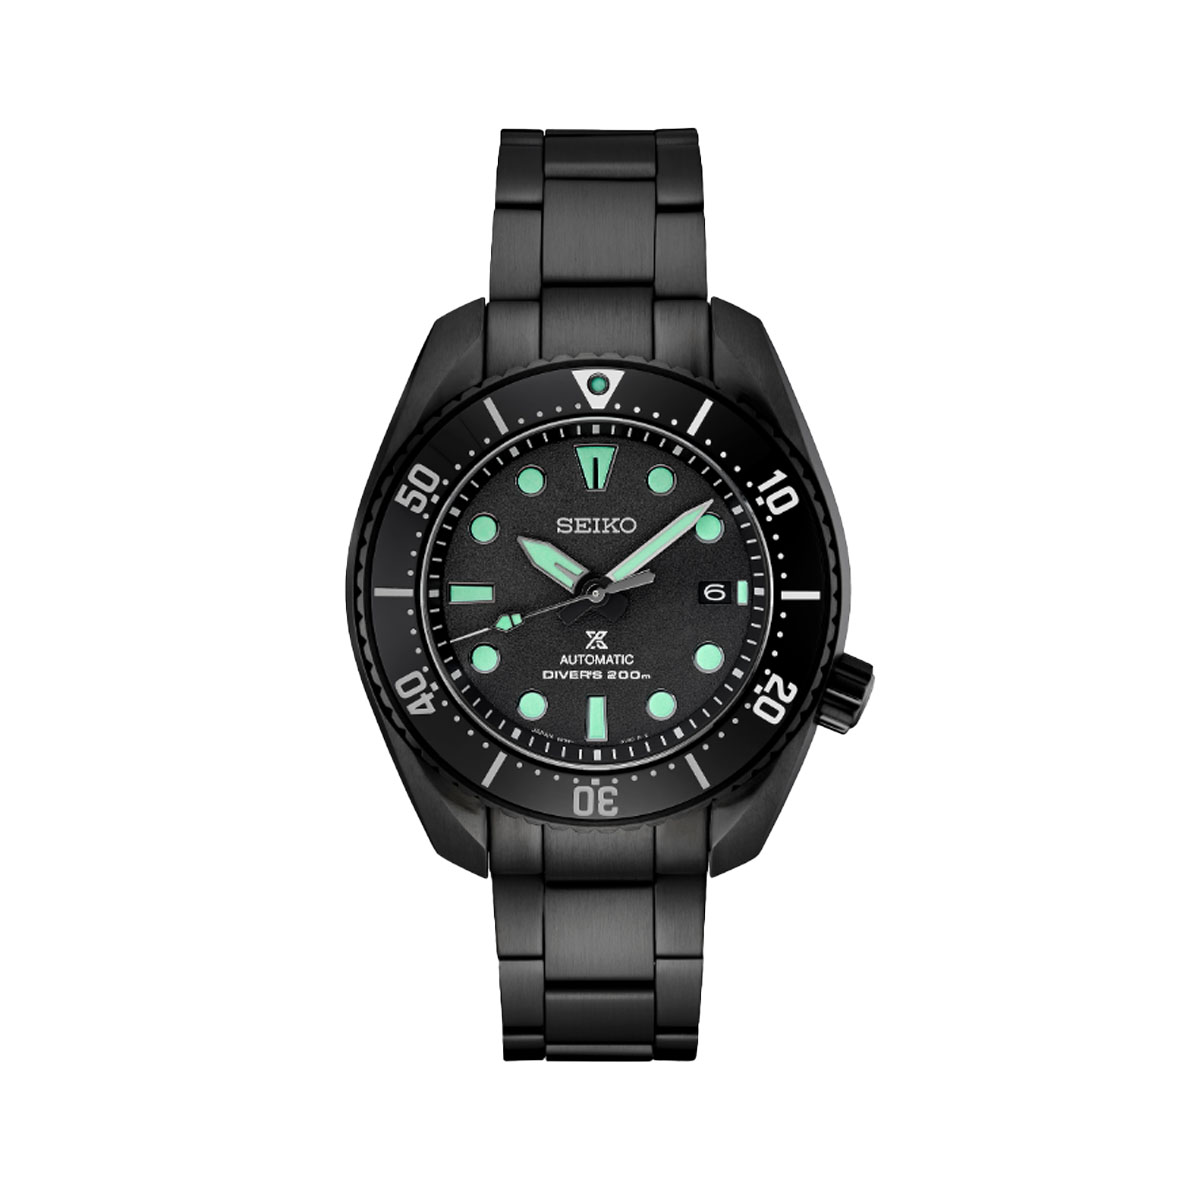 Stainless Steel Seiko Luxe Prospex Black Series Limited Edition